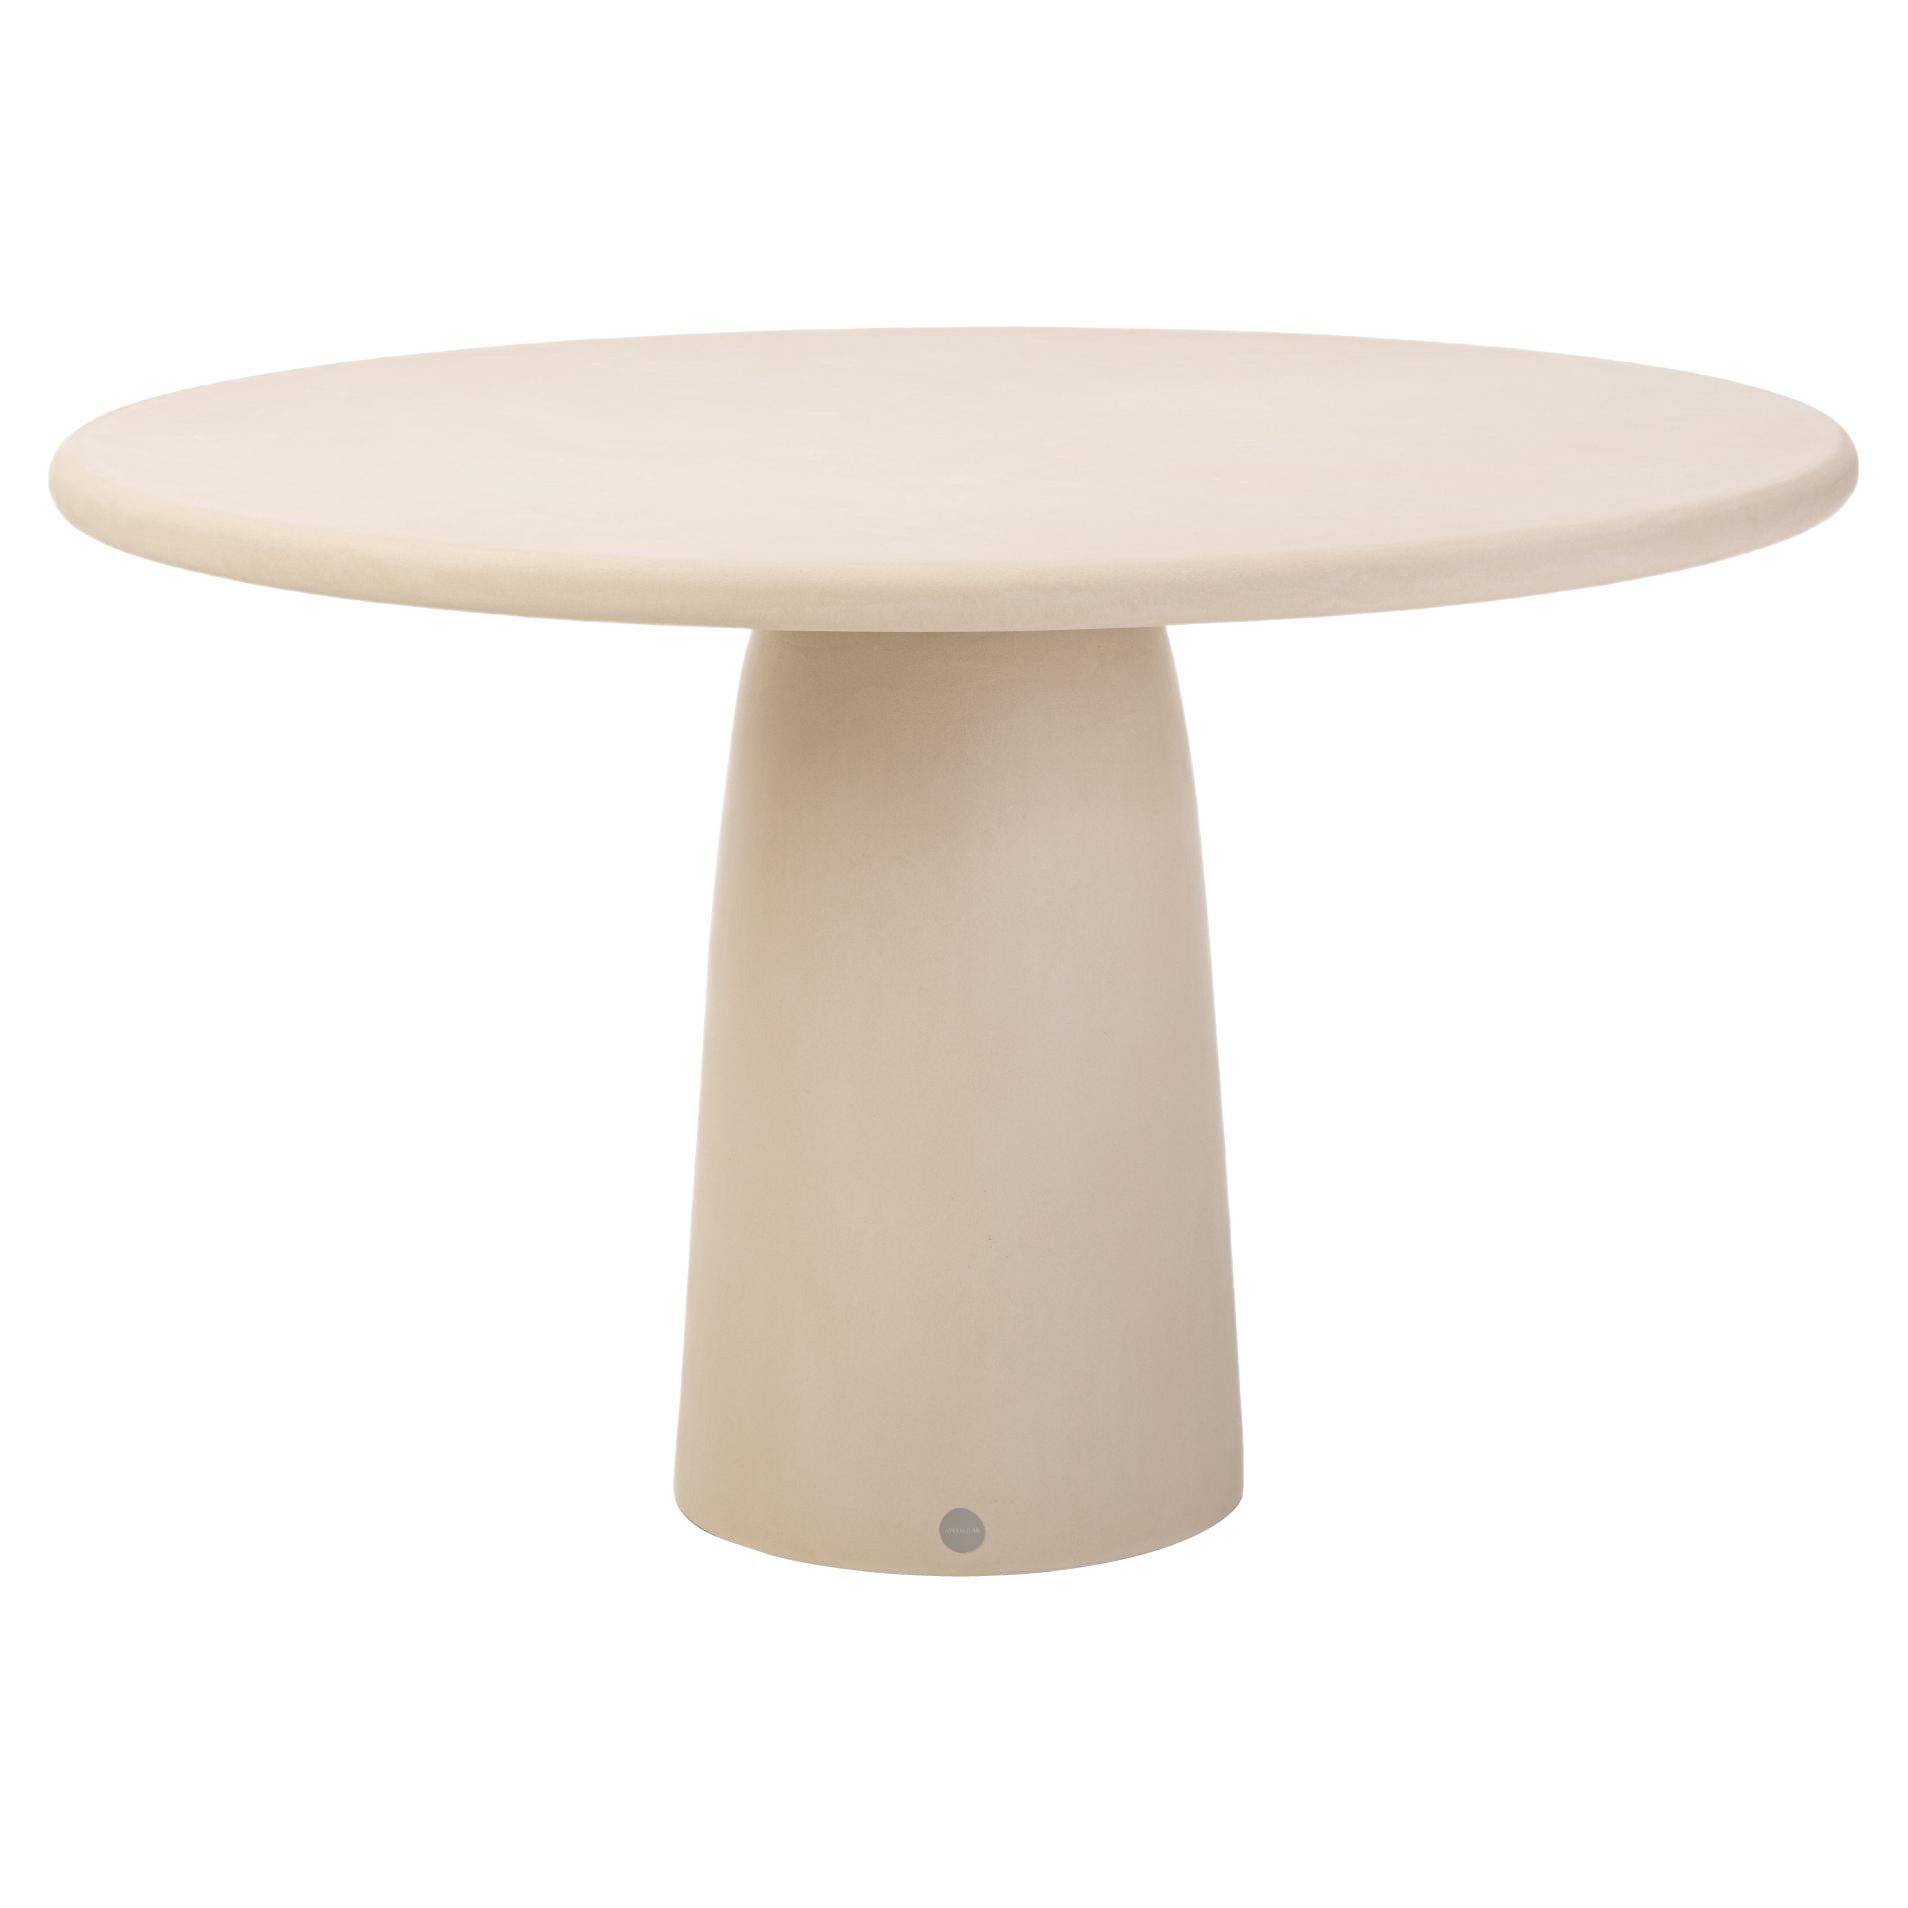 Round Natural Plaster Dining Table "Menhir" 160 by Isabelle Beaumont For Sale